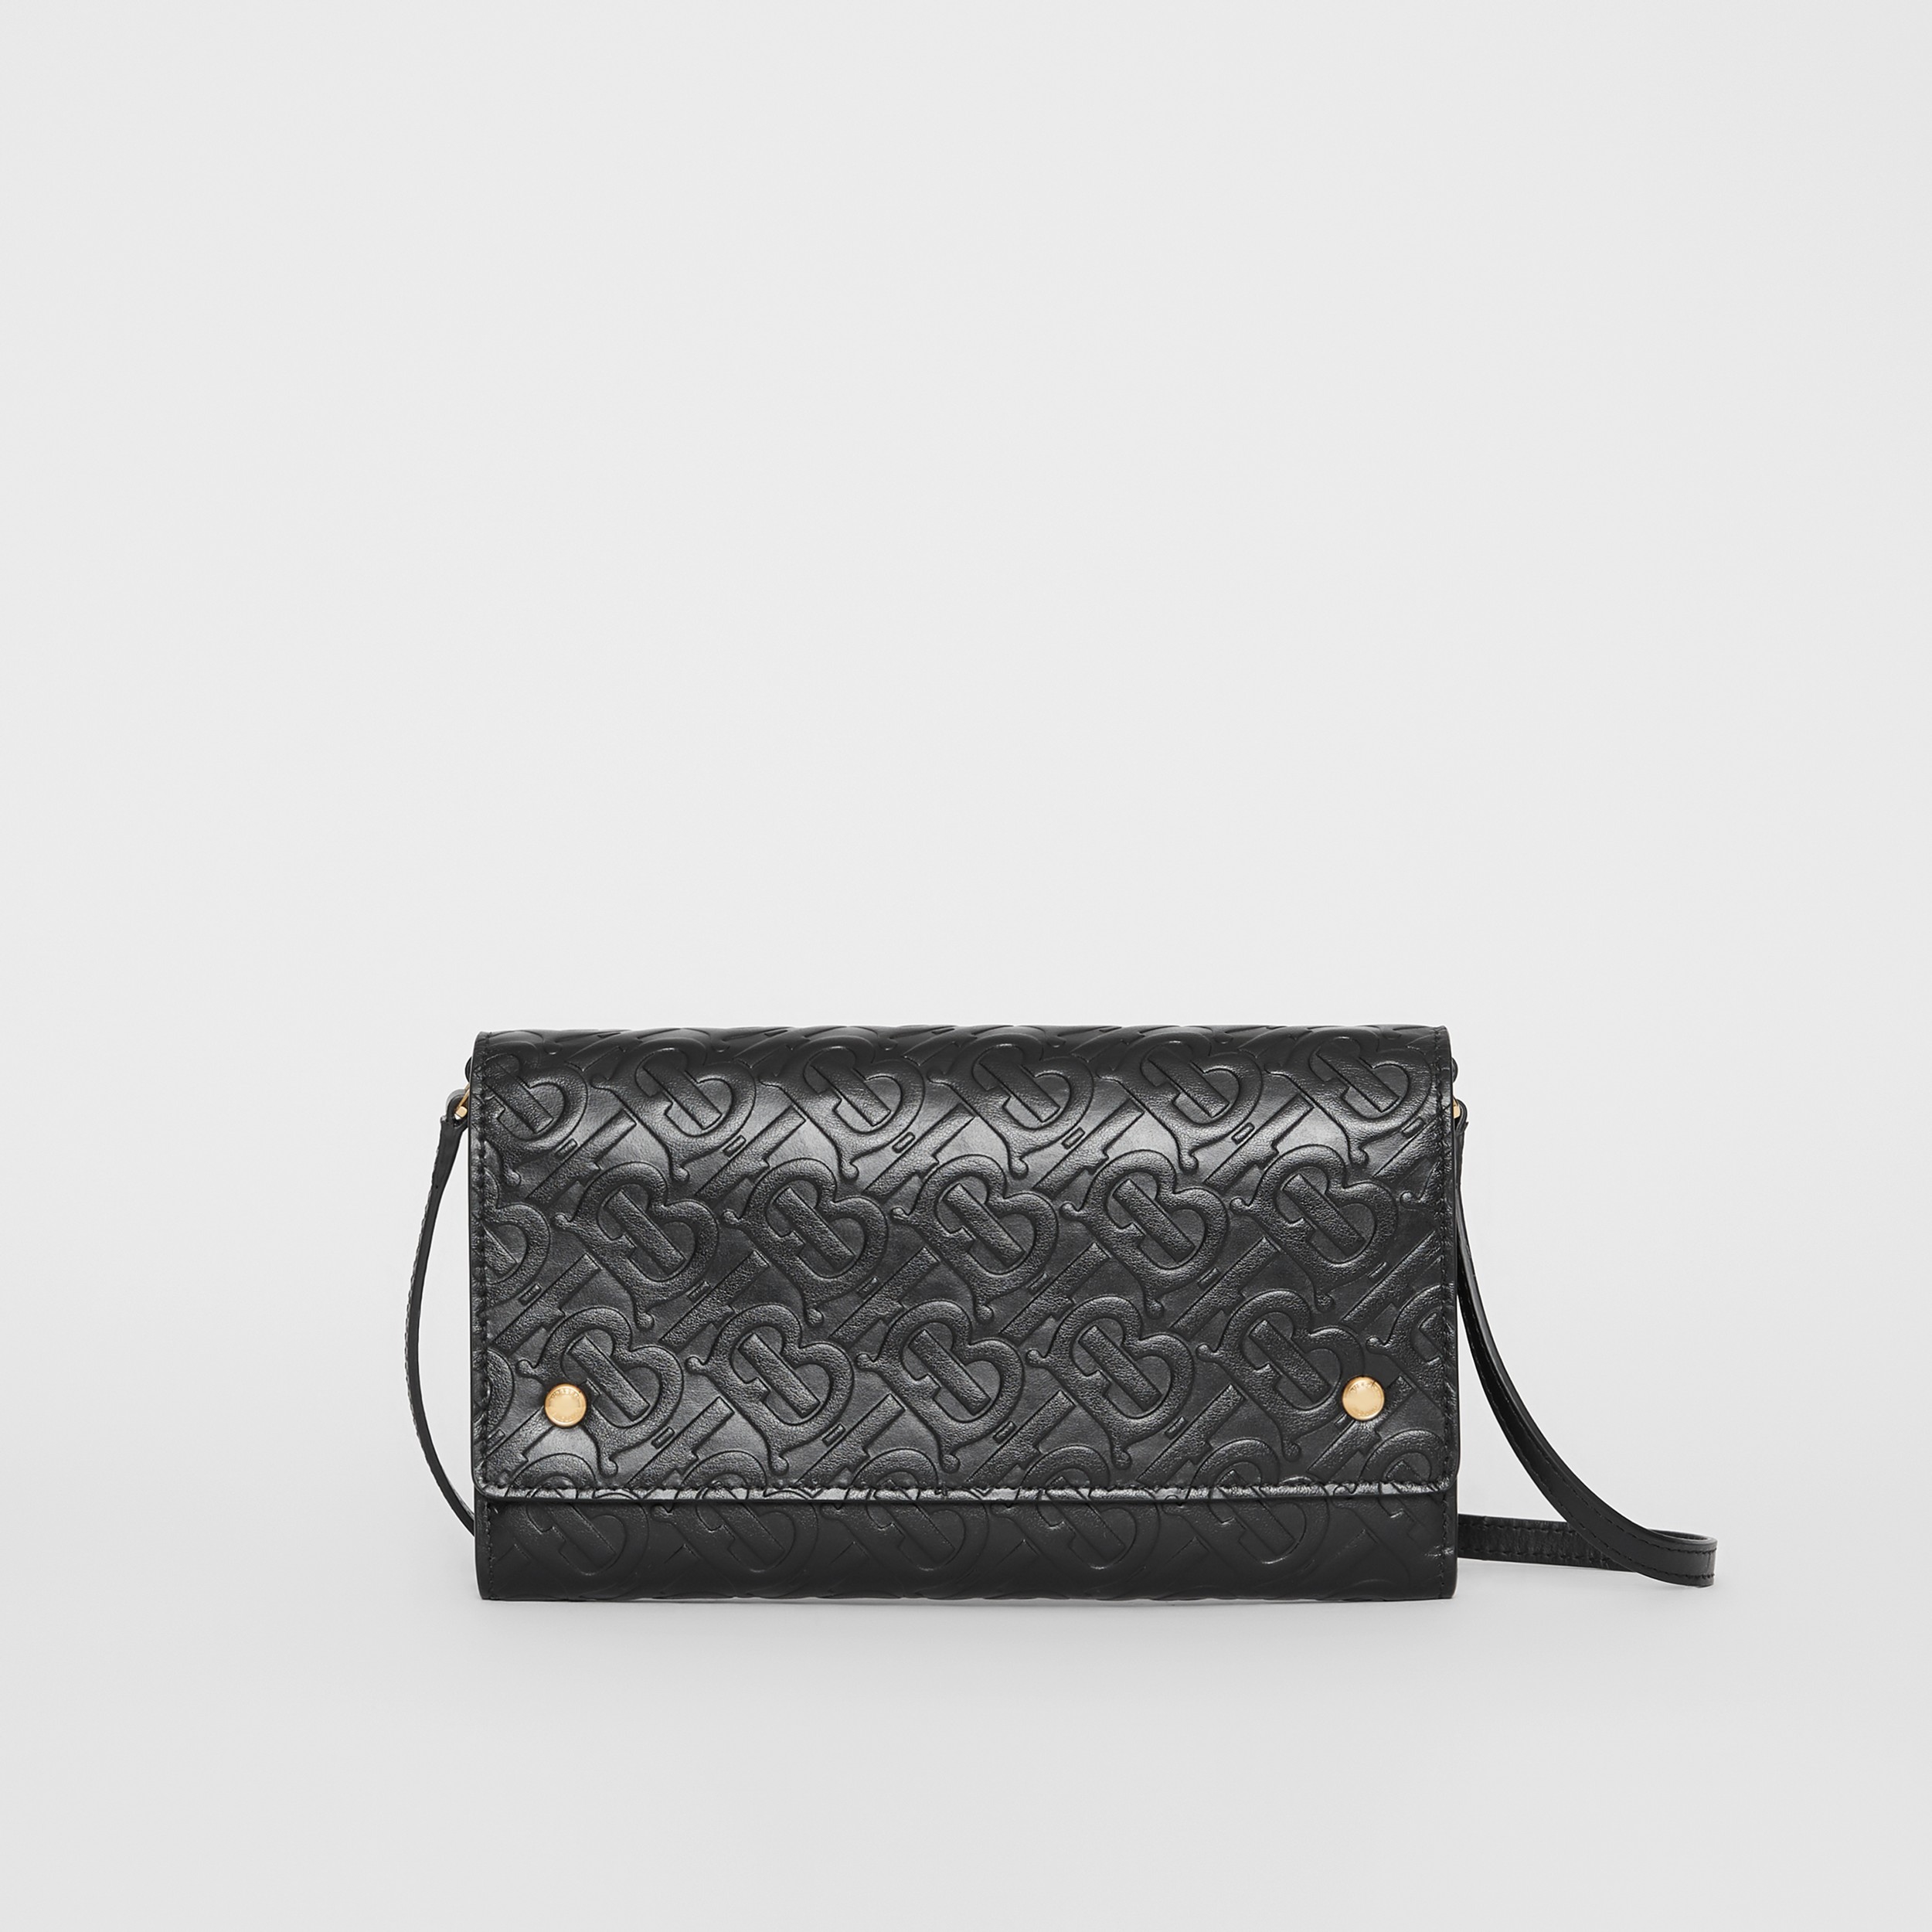 Monogram Leather Wallet with Detachable Strap in Black - Women | Burberry Canada